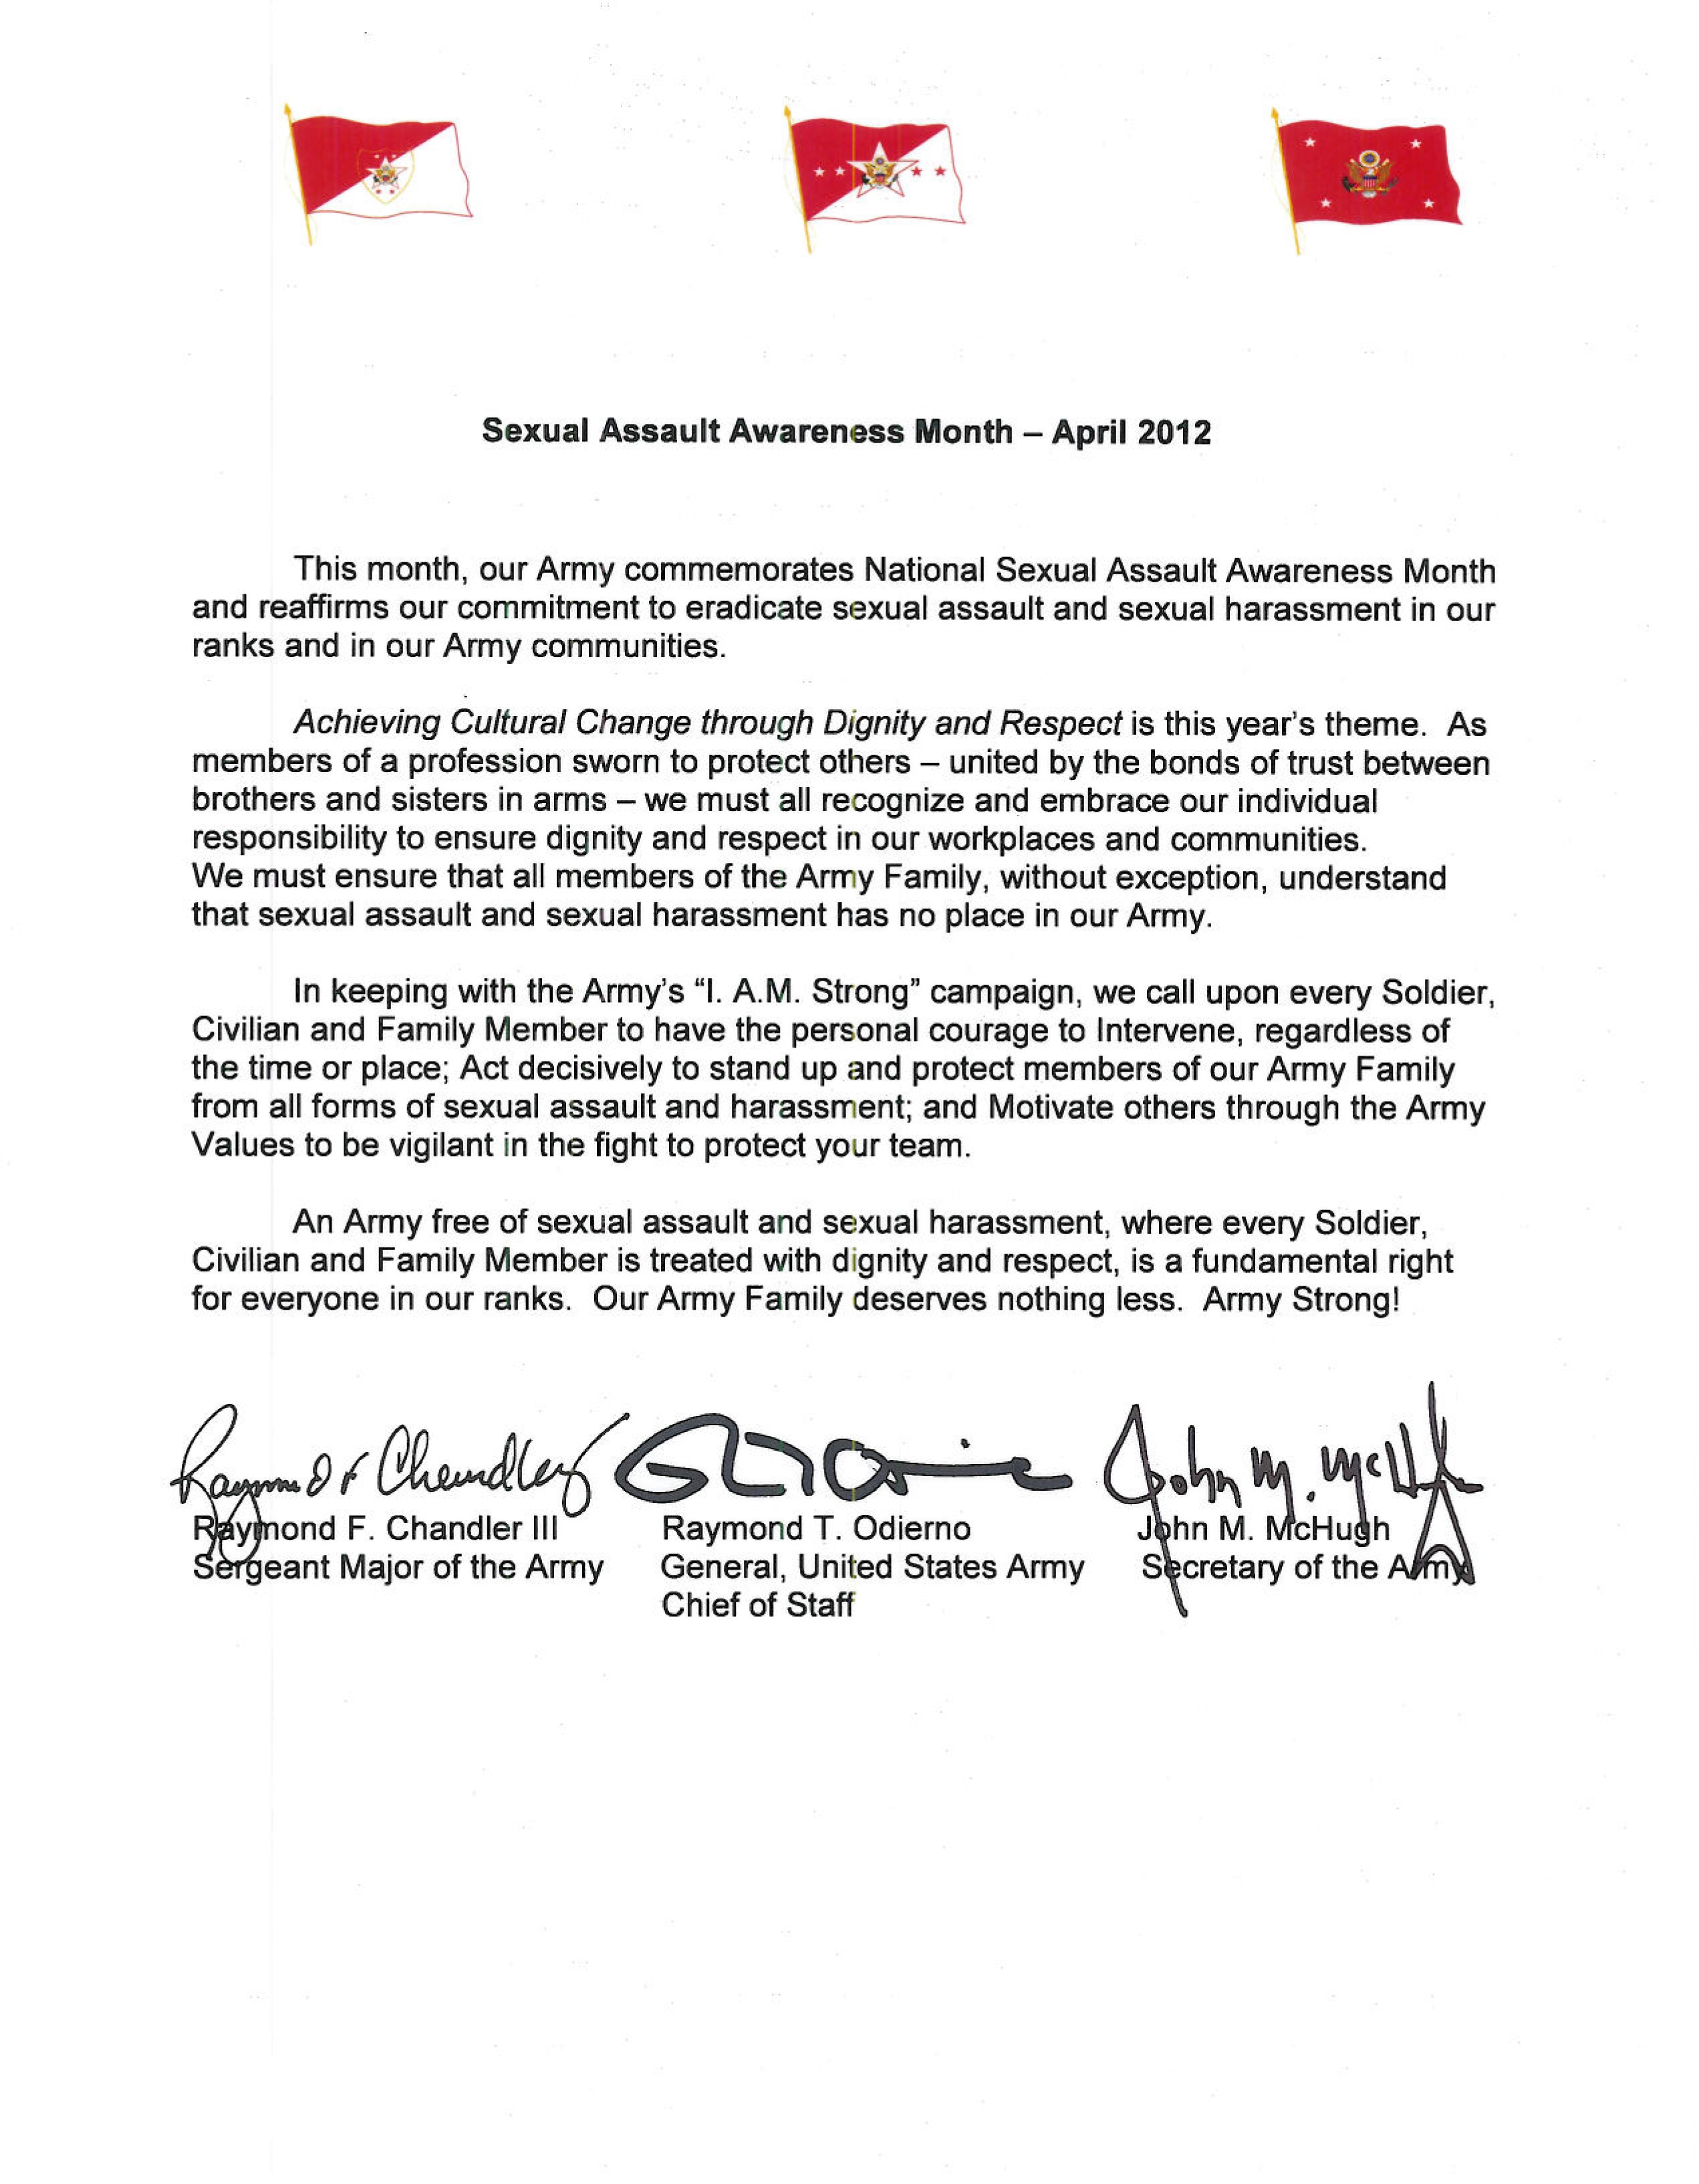 Sexual Assault Awareness Month Tri Signed Letter Article The United States Army 6835